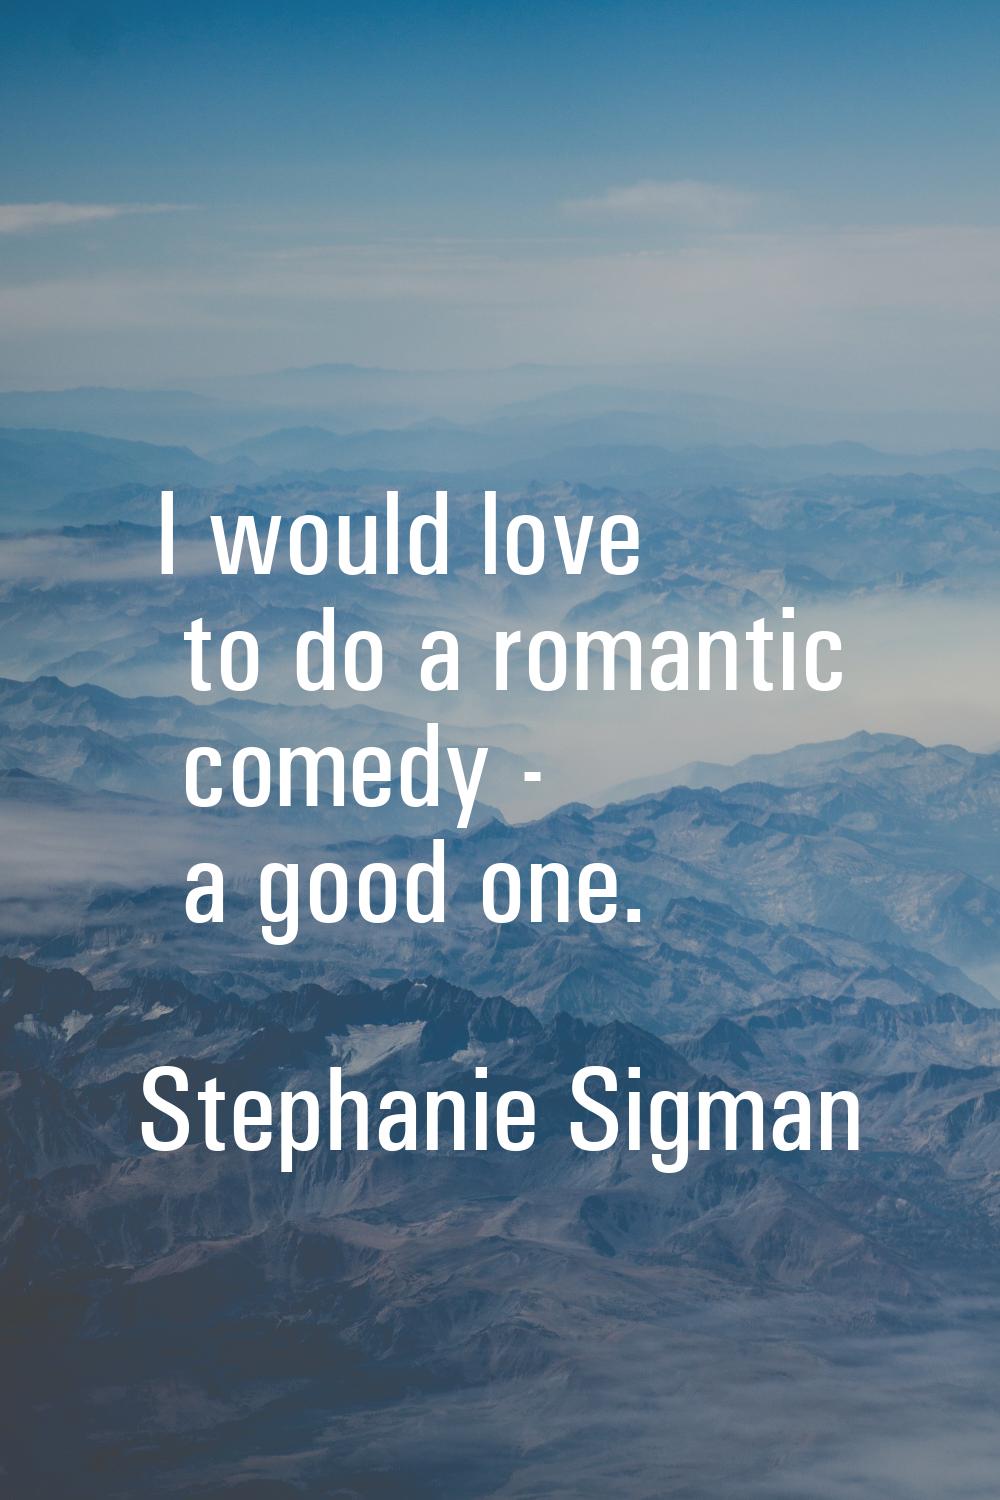 I would love to do a romantic comedy - a good one.